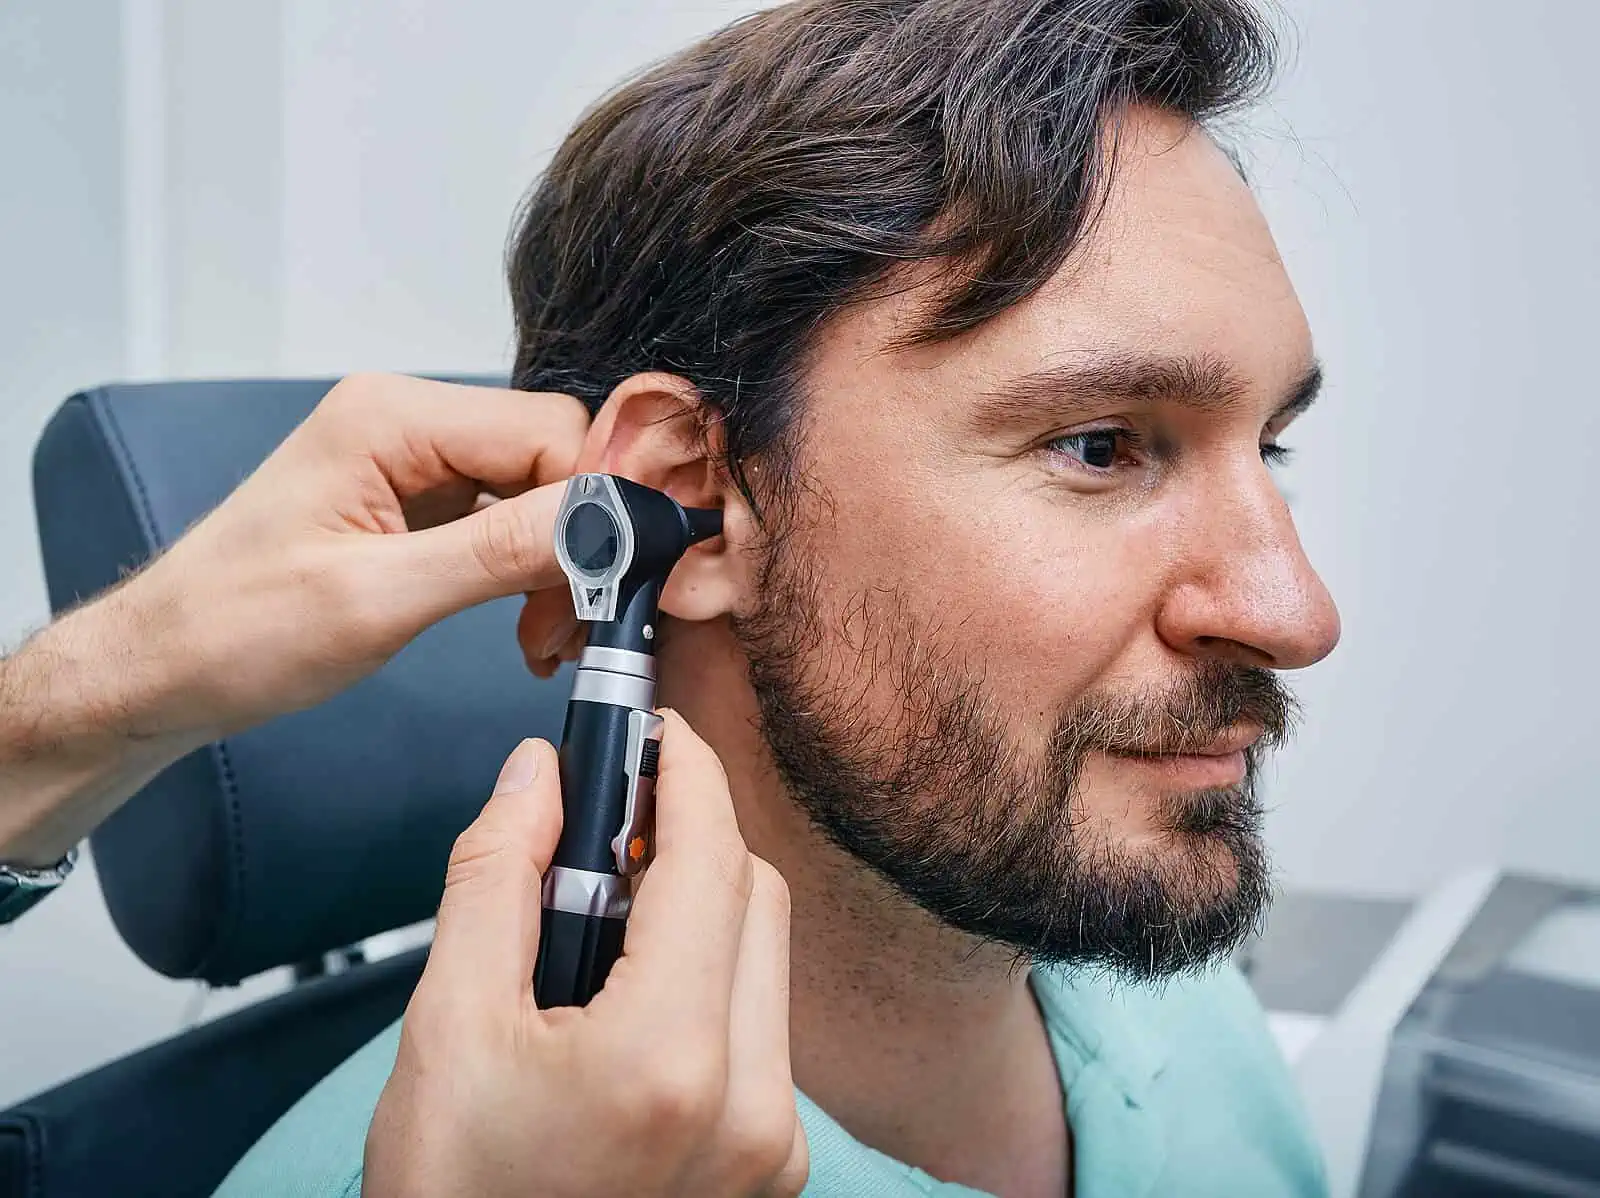 Man getting ear examined by audiologist